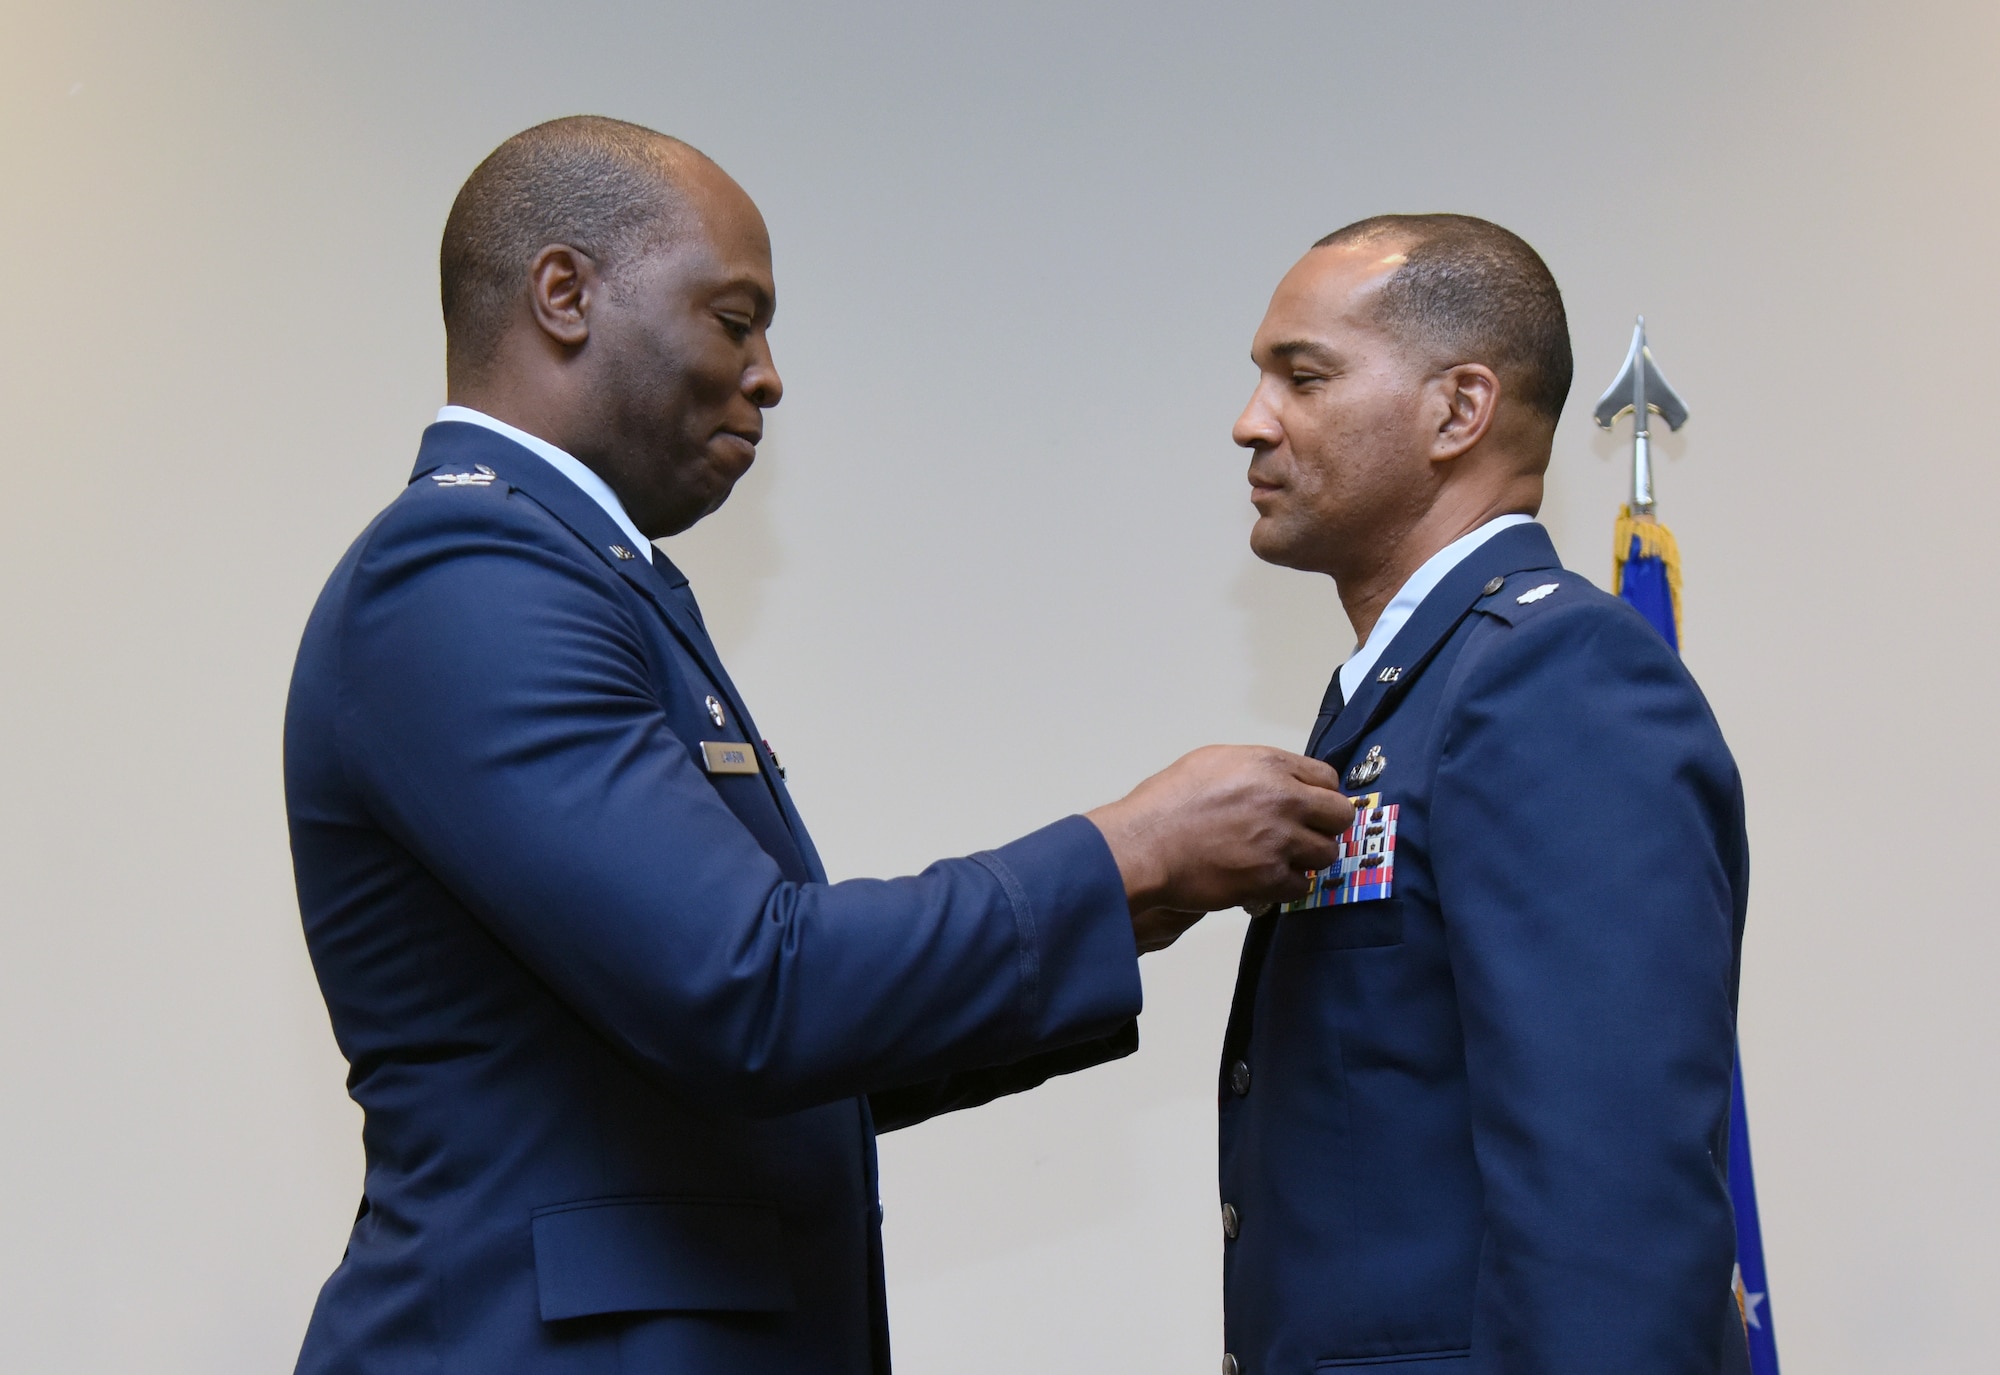 U.S. Air Force Col. Leo Lawson, Jr., 81st Training Group commander, presents the Meritorious Service medal to Lt. Col. Billy Wilson, Jr., outgoing 334th Training Squadron commander, during the 334th TRS change of command ceremony in the Roberts Consolidated Aircraft Maintenance Facility at Keesler Air Force Base, Mississippi, May 23, 2019. Wilson passed on command to Lt. Col. Harry James during the ceremony. (U.S. Air Force photo by Kemberly Groue)